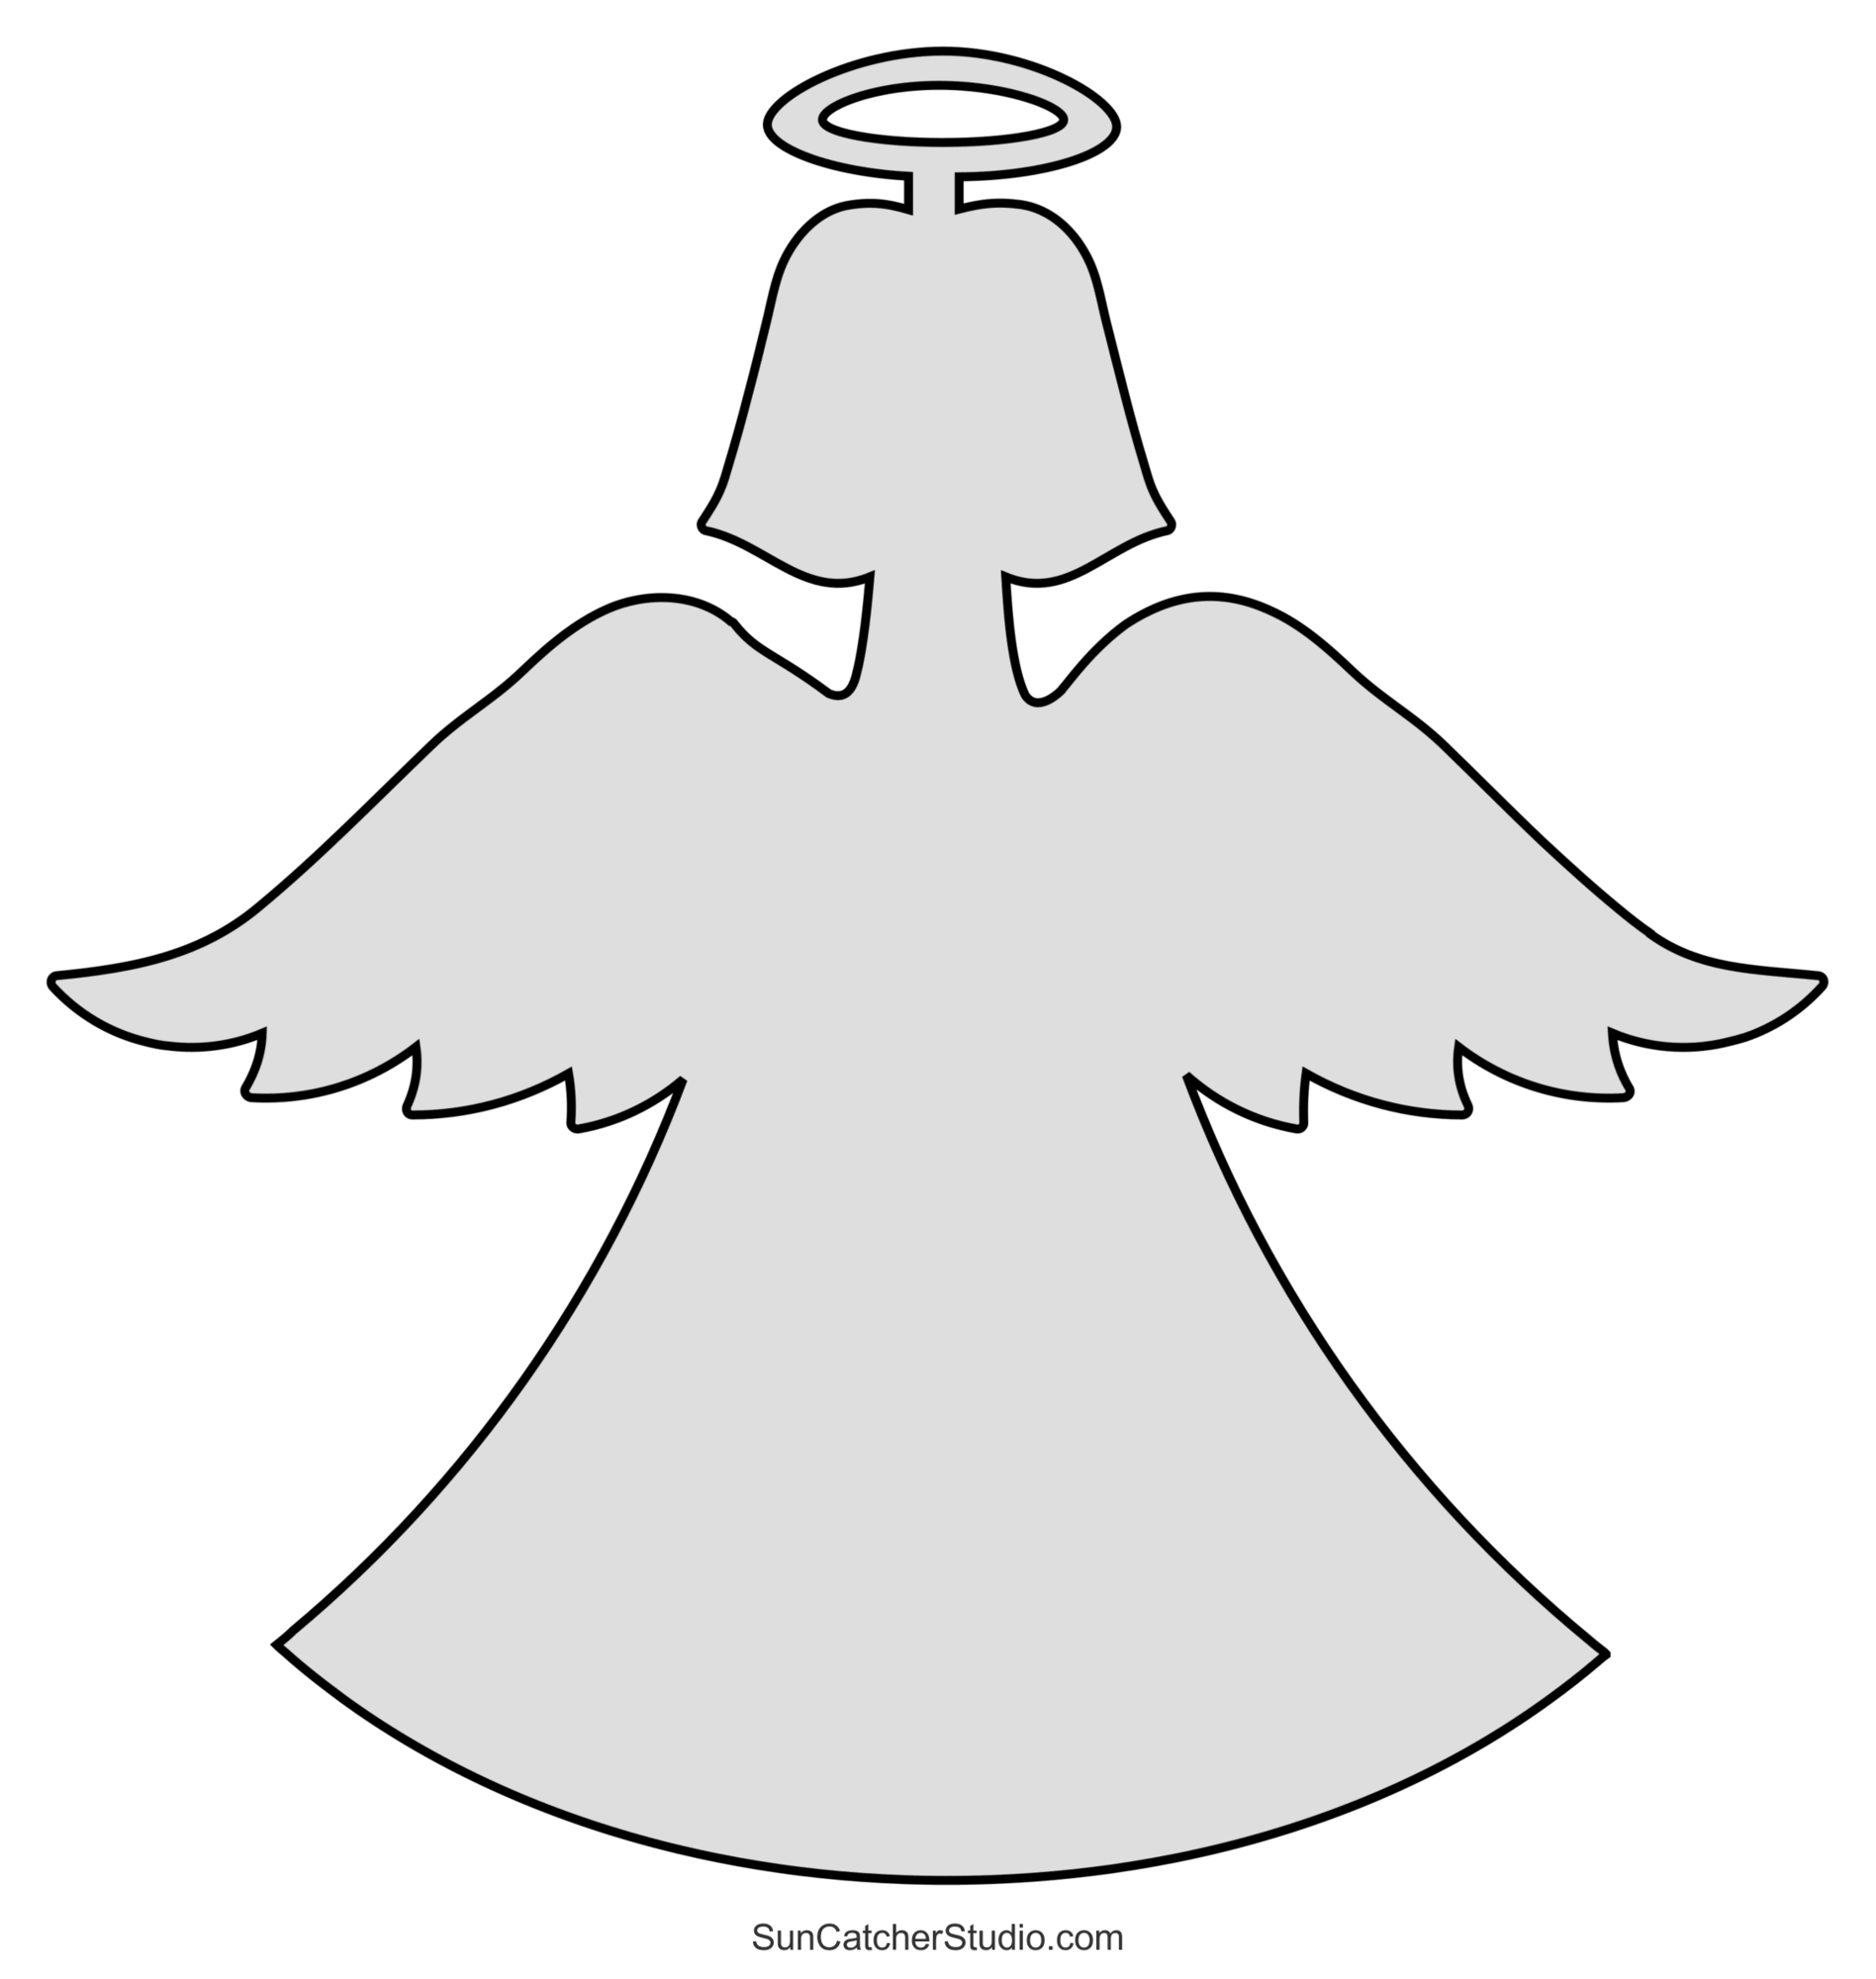 Angel Templates And Stencils (Free Printable Patterns) – Diy - Free Printable Angel Templates